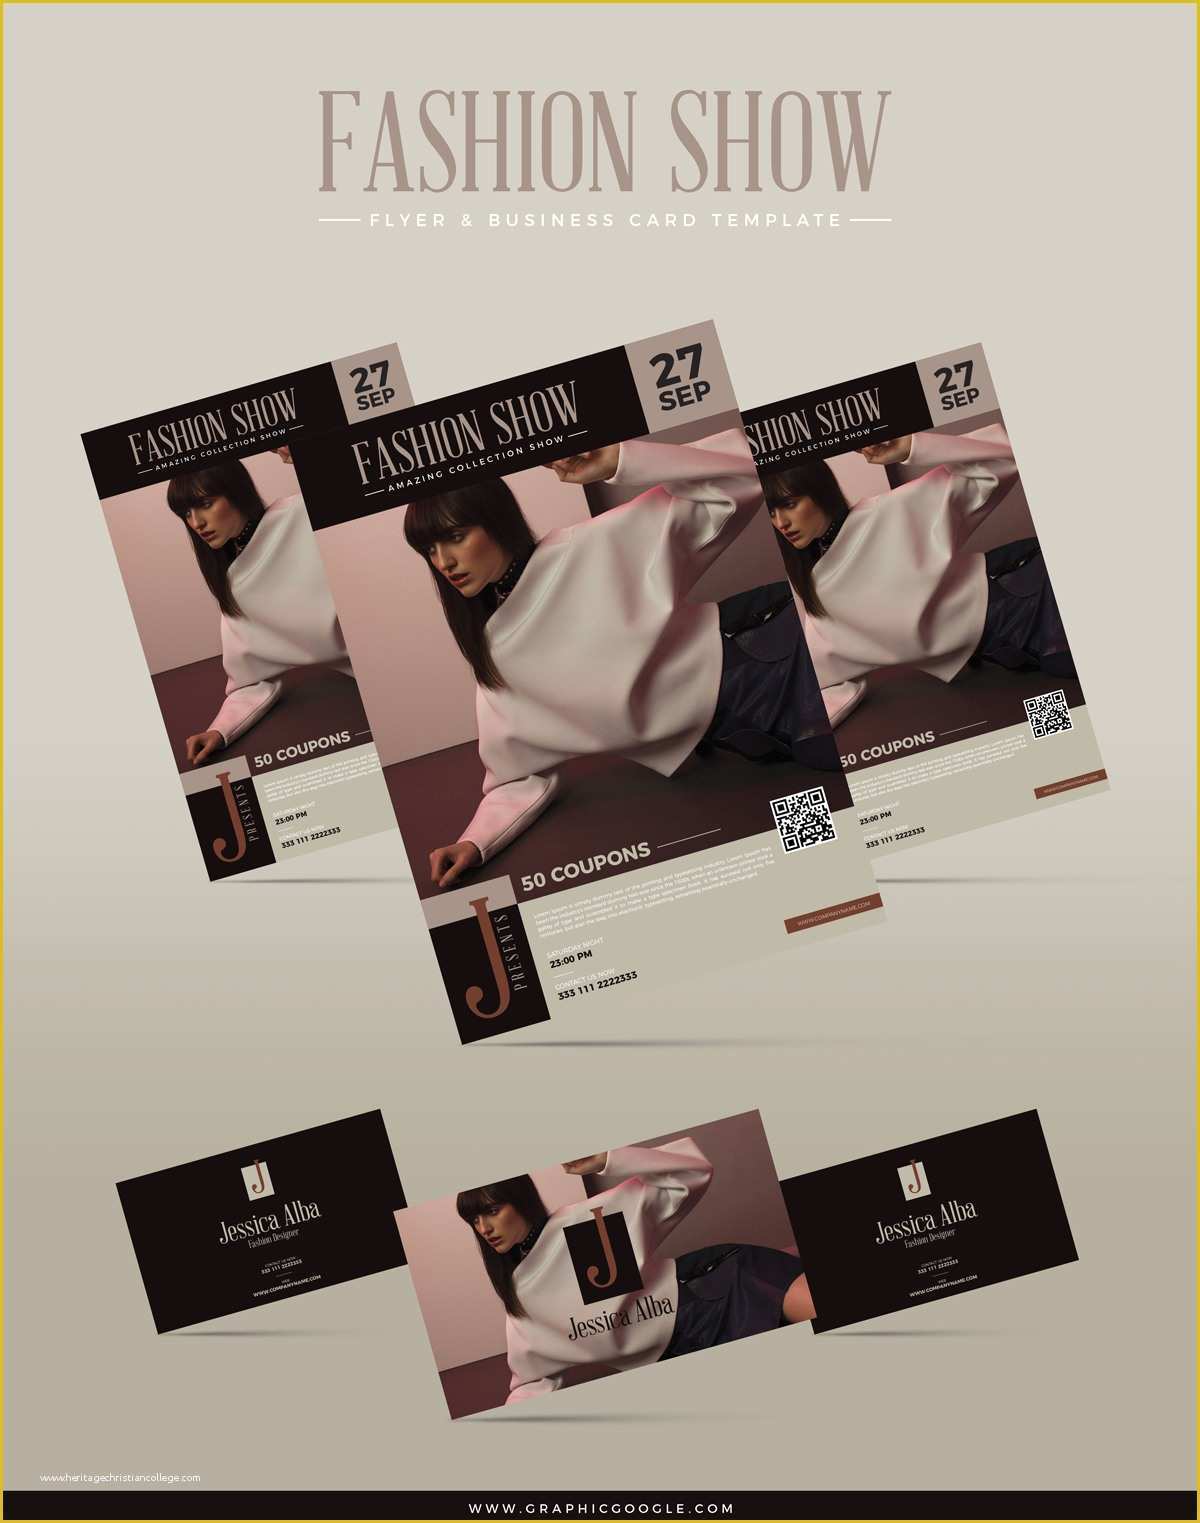 Free Fashion Show Flyer Template Of Free Fashion Show Flyer & Business Card Templategraphic